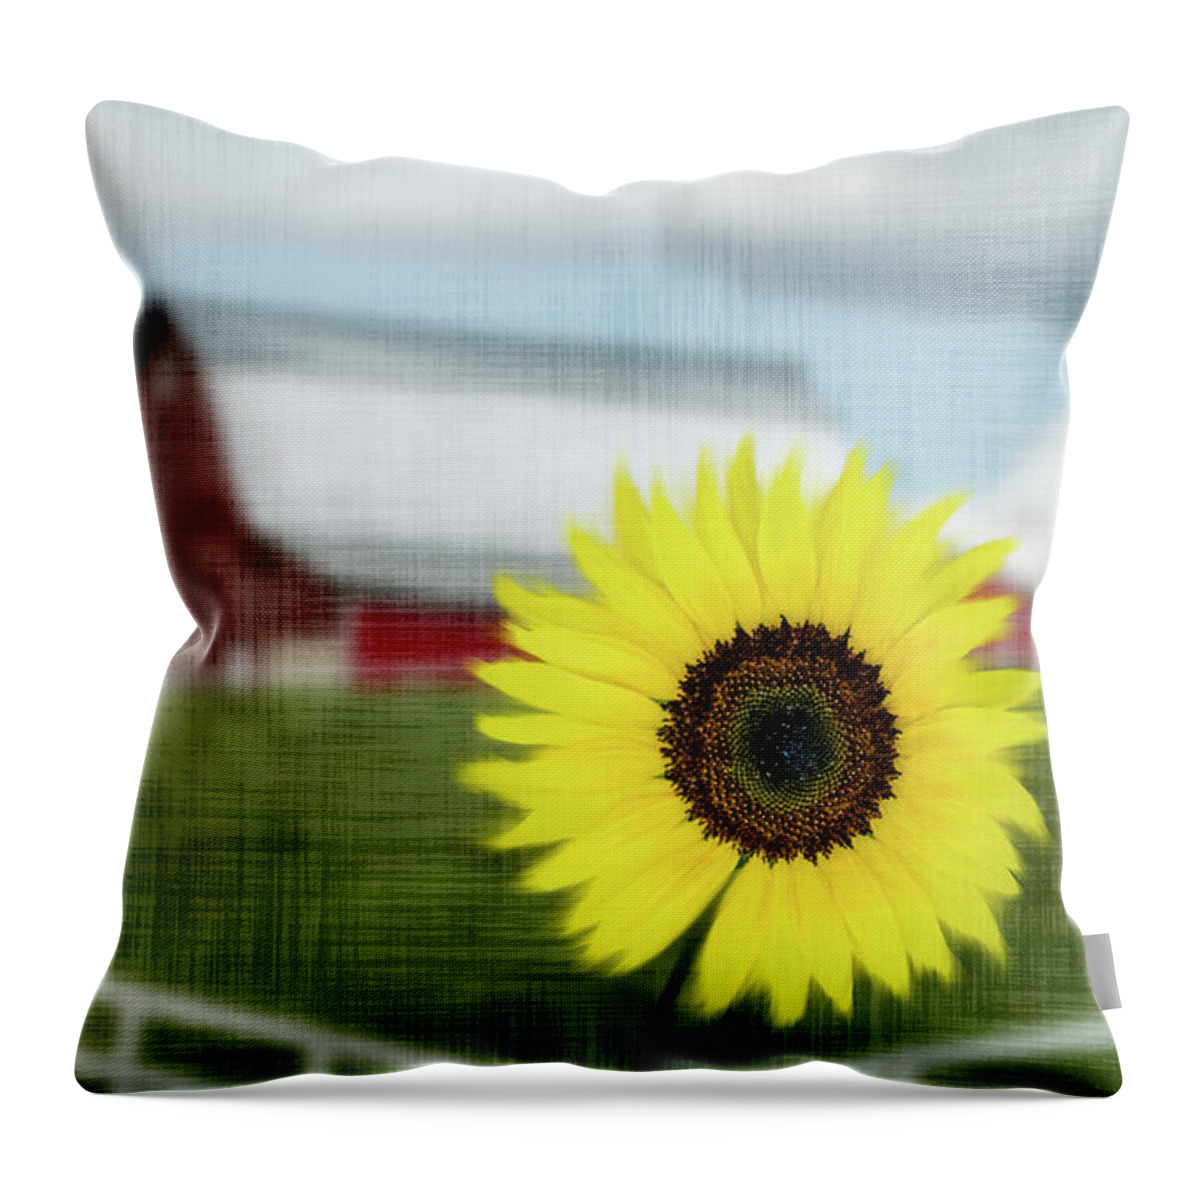 Sunflower Throw Pillow featuring the photograph Sunflower Farm by Patti Deters